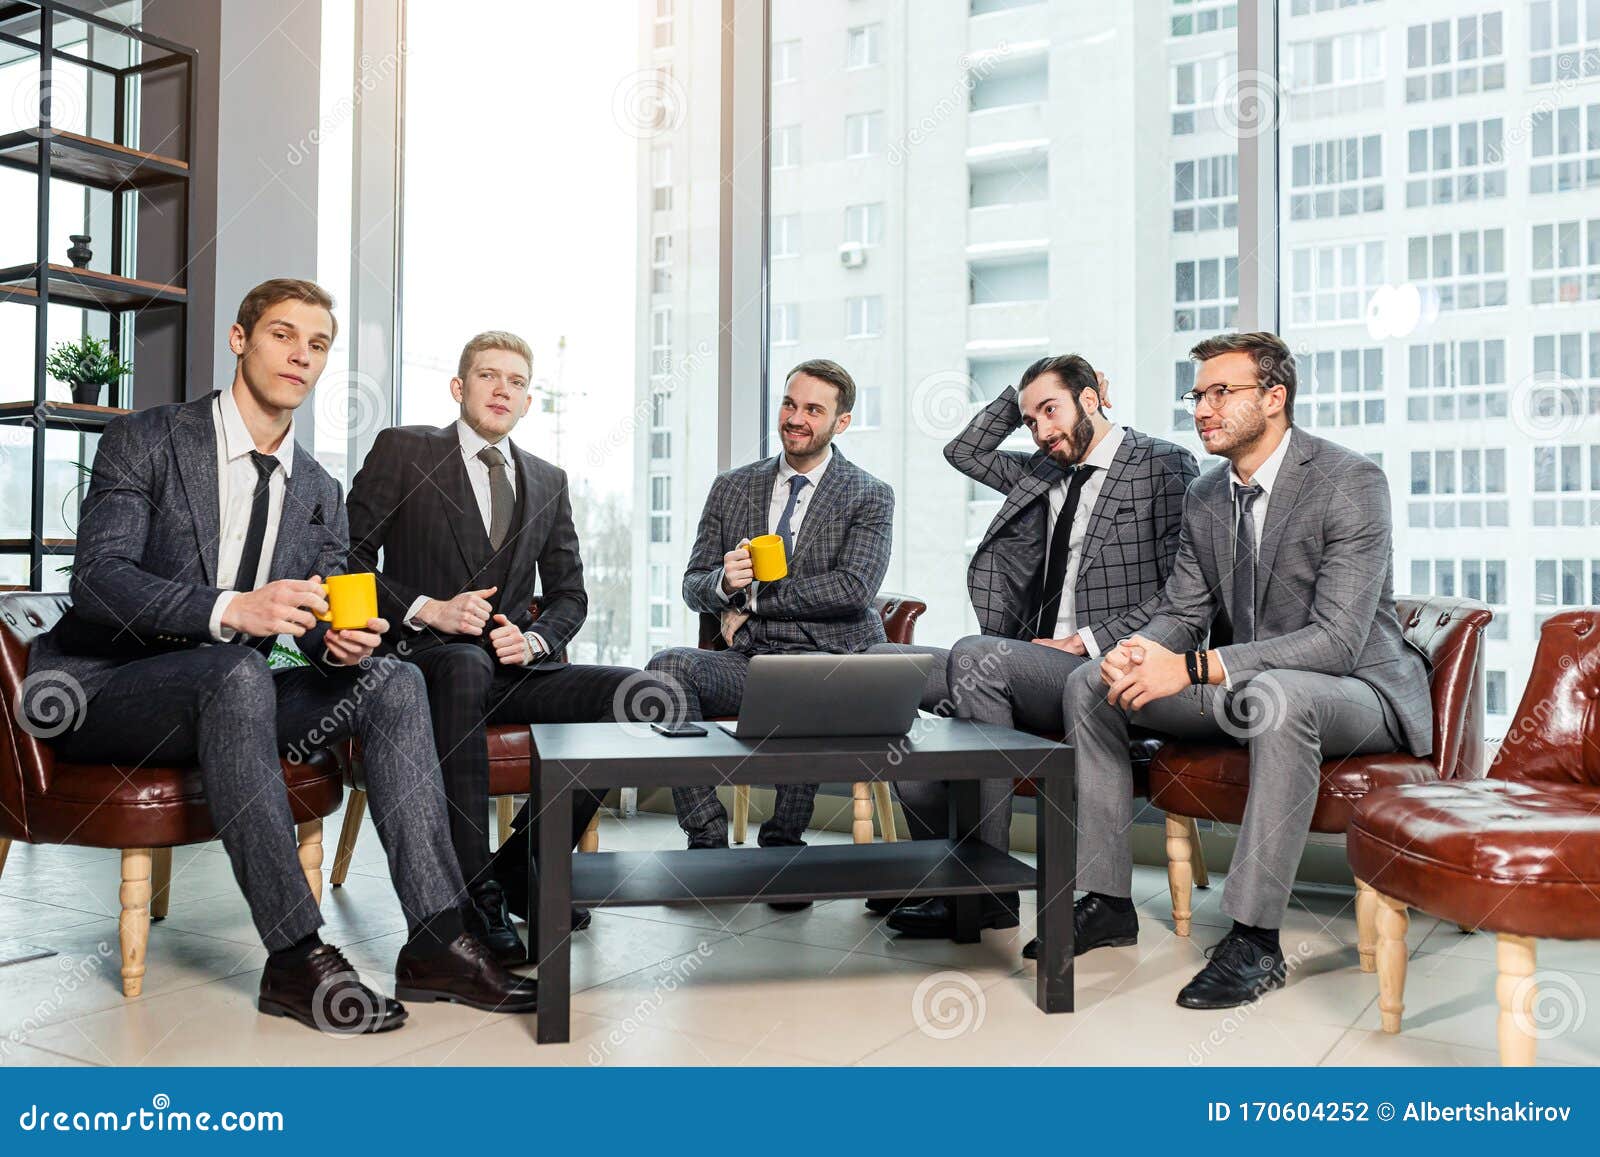 group-business-men-have-active-discussion-modern-office-young-gathered-together-to-discuss-strategies-new-ideas-170604252.jpg